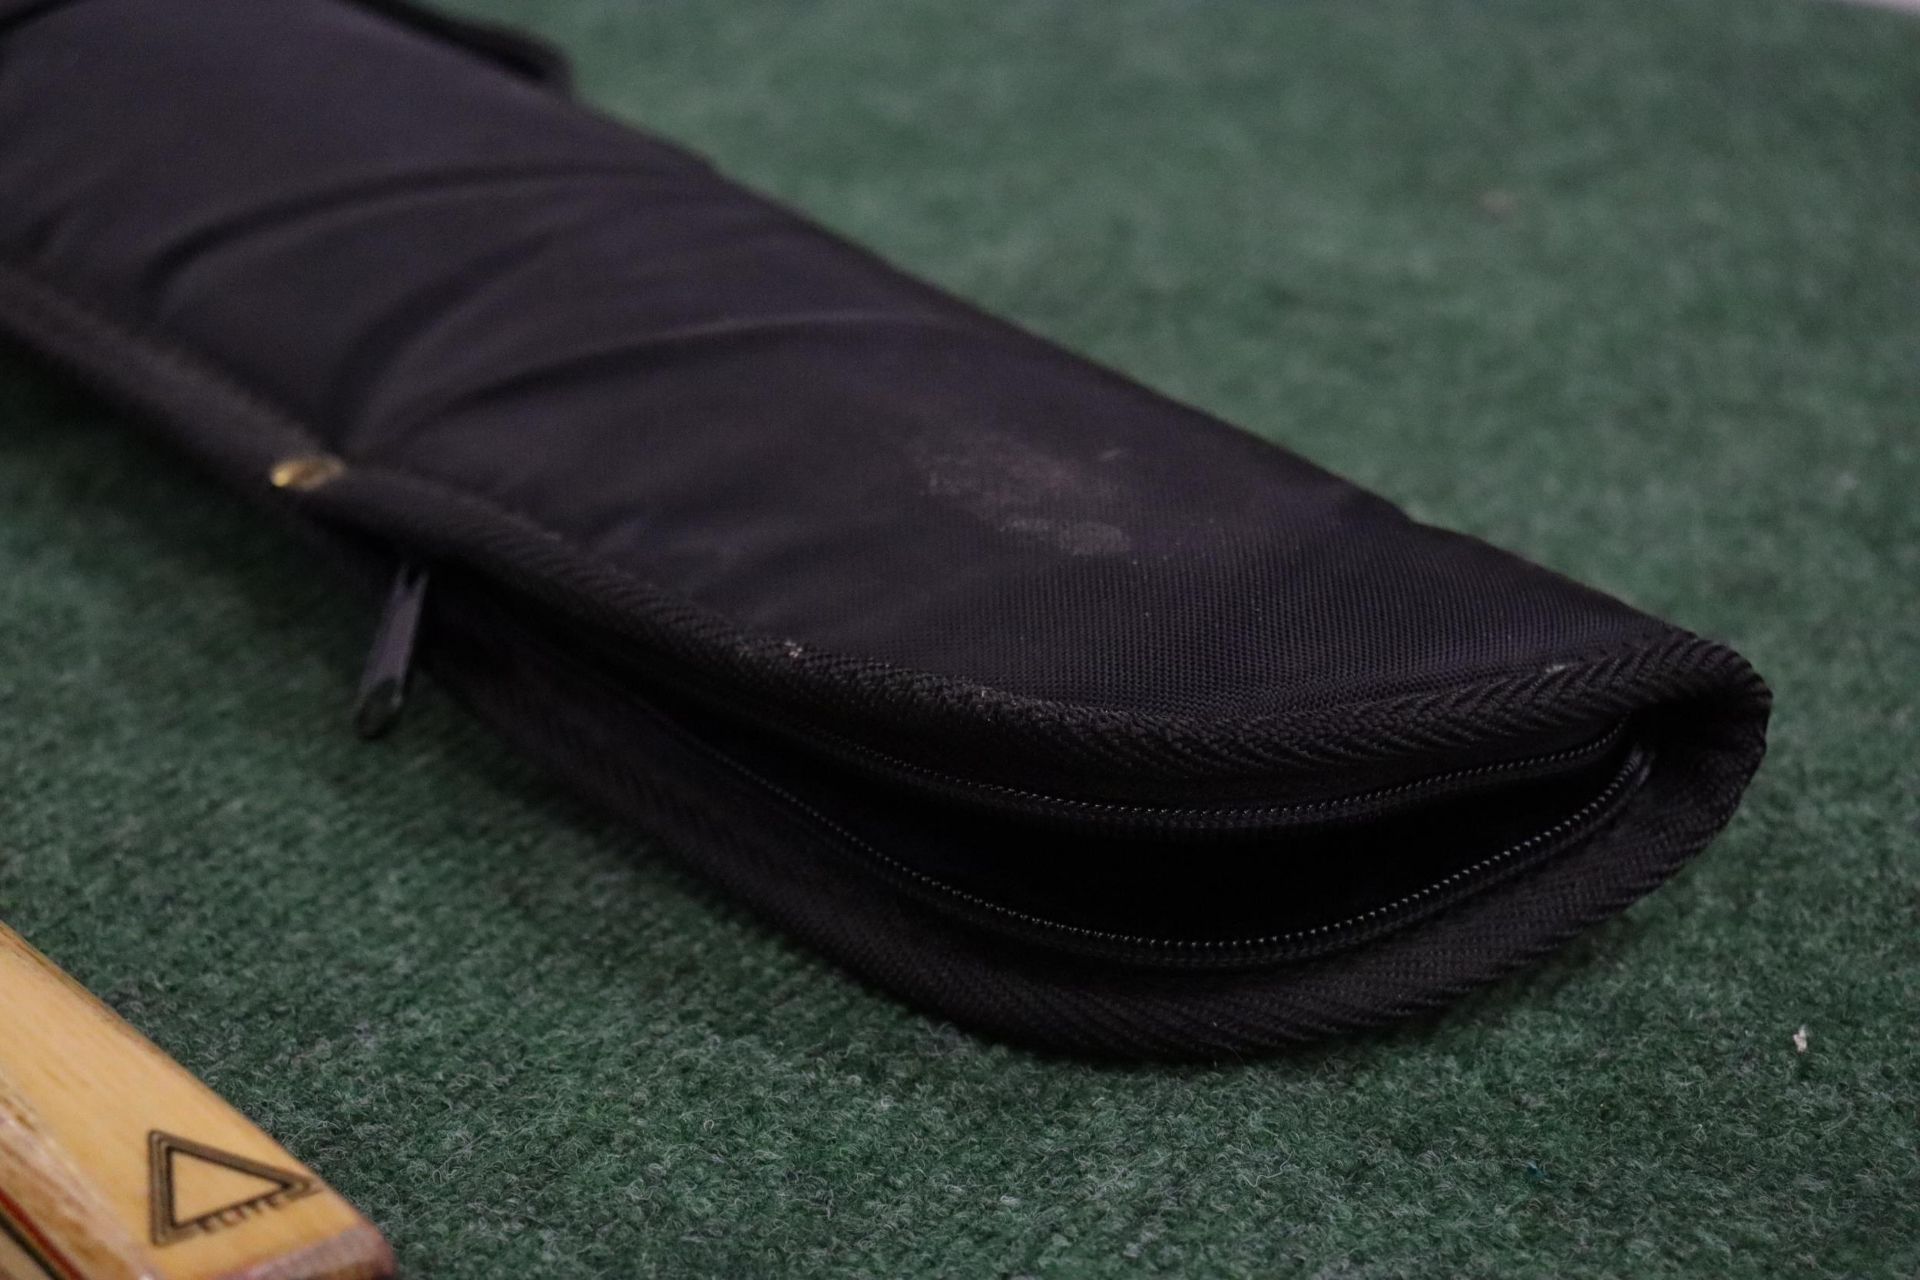 A SNOOKER/POOL CUE IN A JIMMY WHITE SOFT CASE - Image 8 of 8